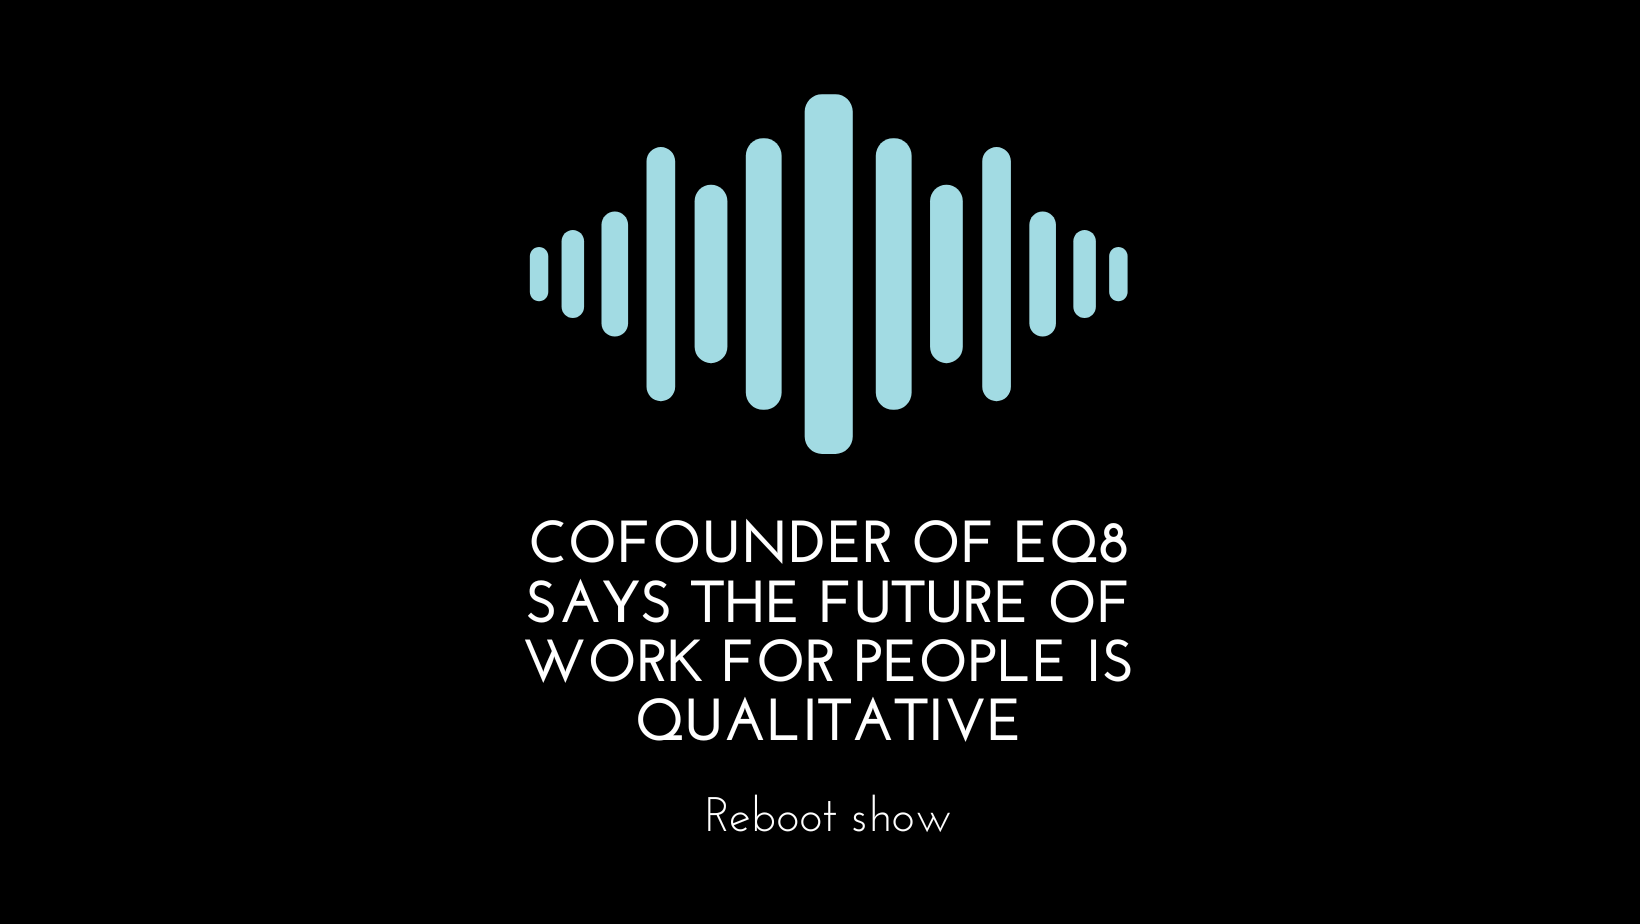 Cofounder of eQ8 says the future of work for people is qualitative